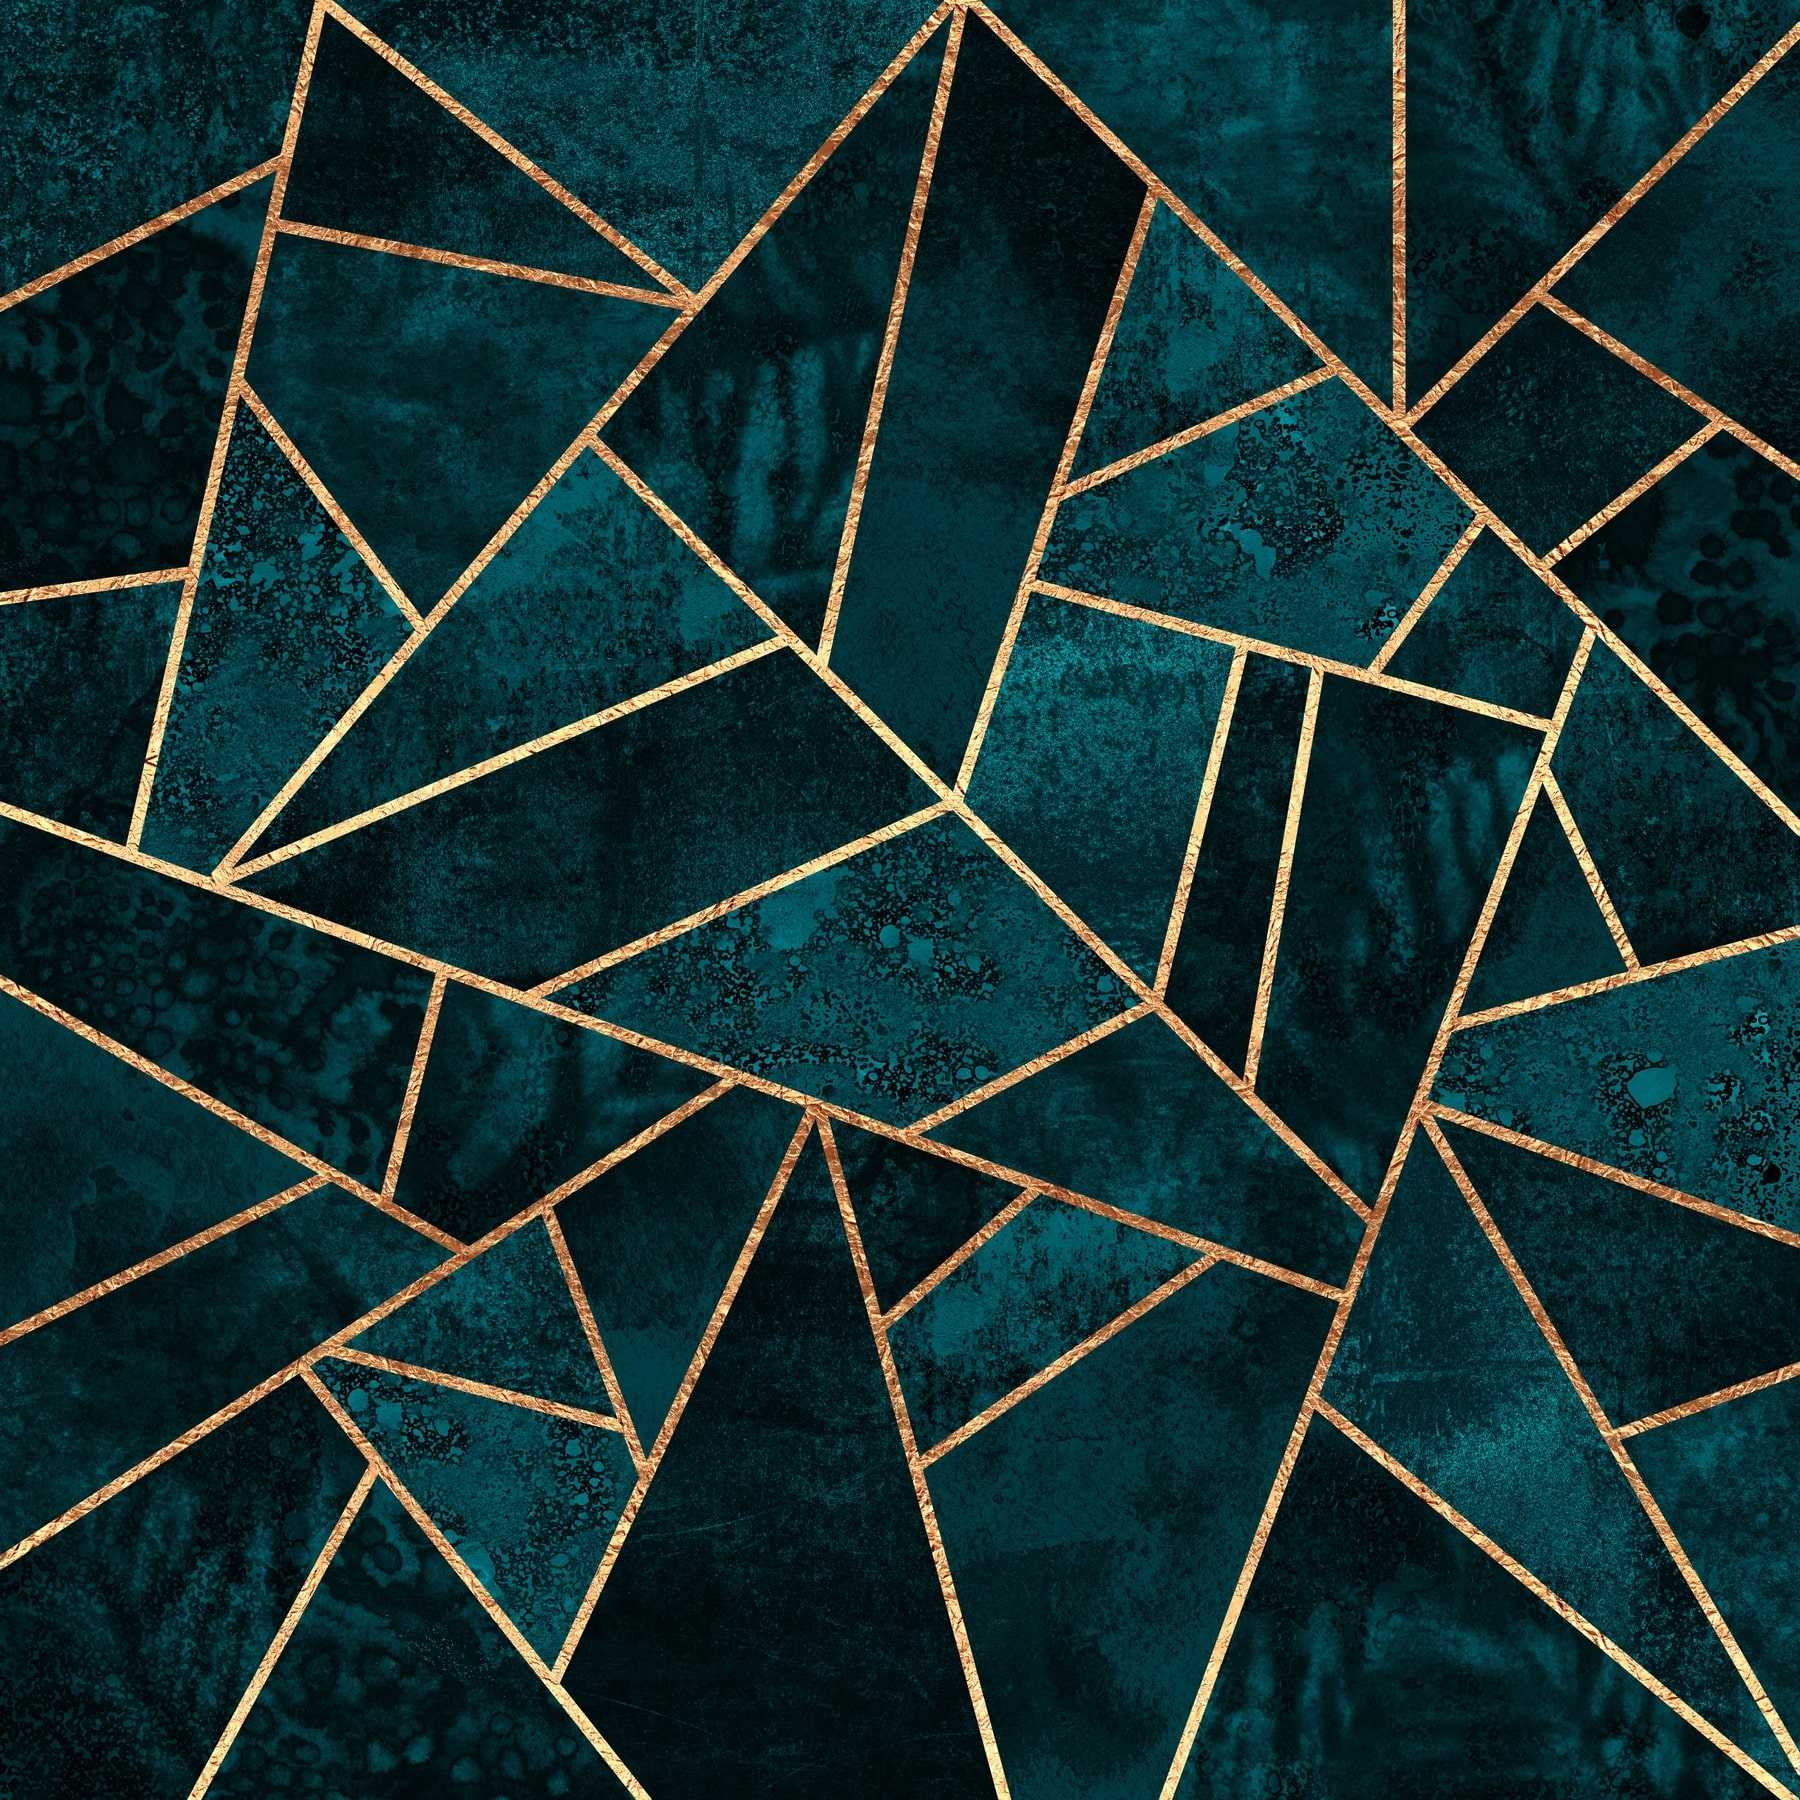 A teal and gold geometric pattern - Teal, cyan